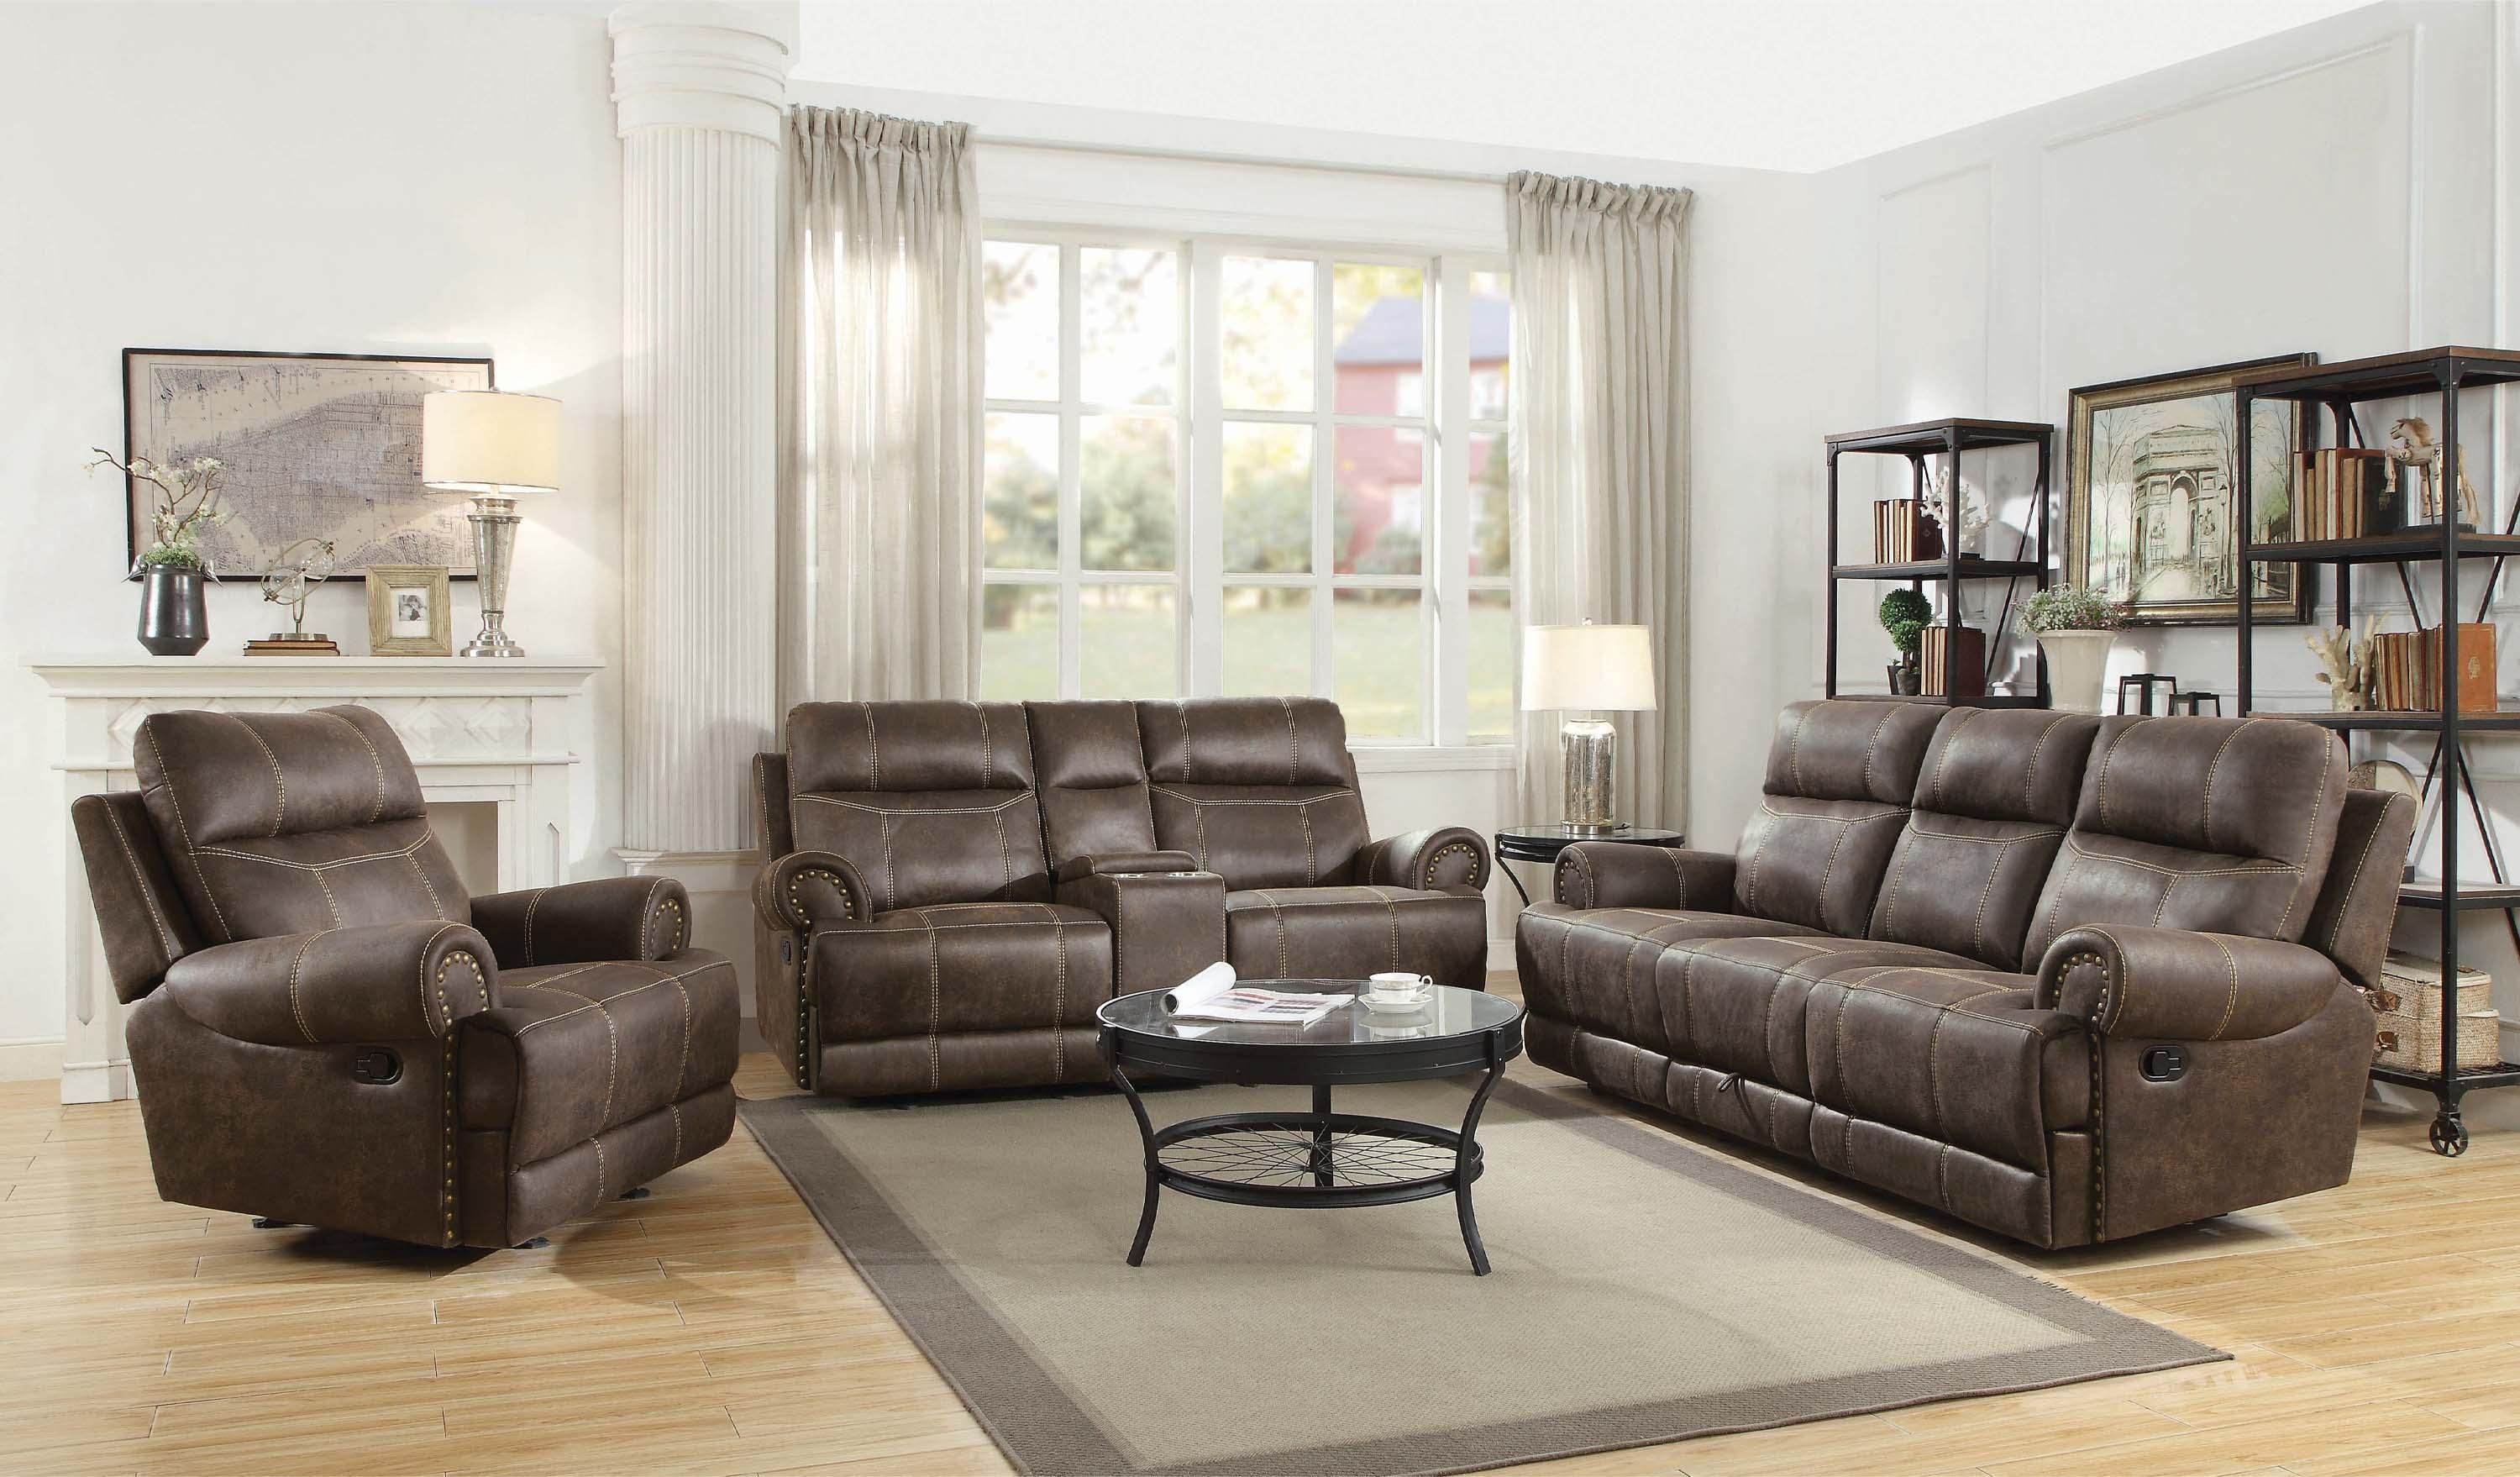 Traditional Motion Sofa Brixton 602441 in Brown Fabric